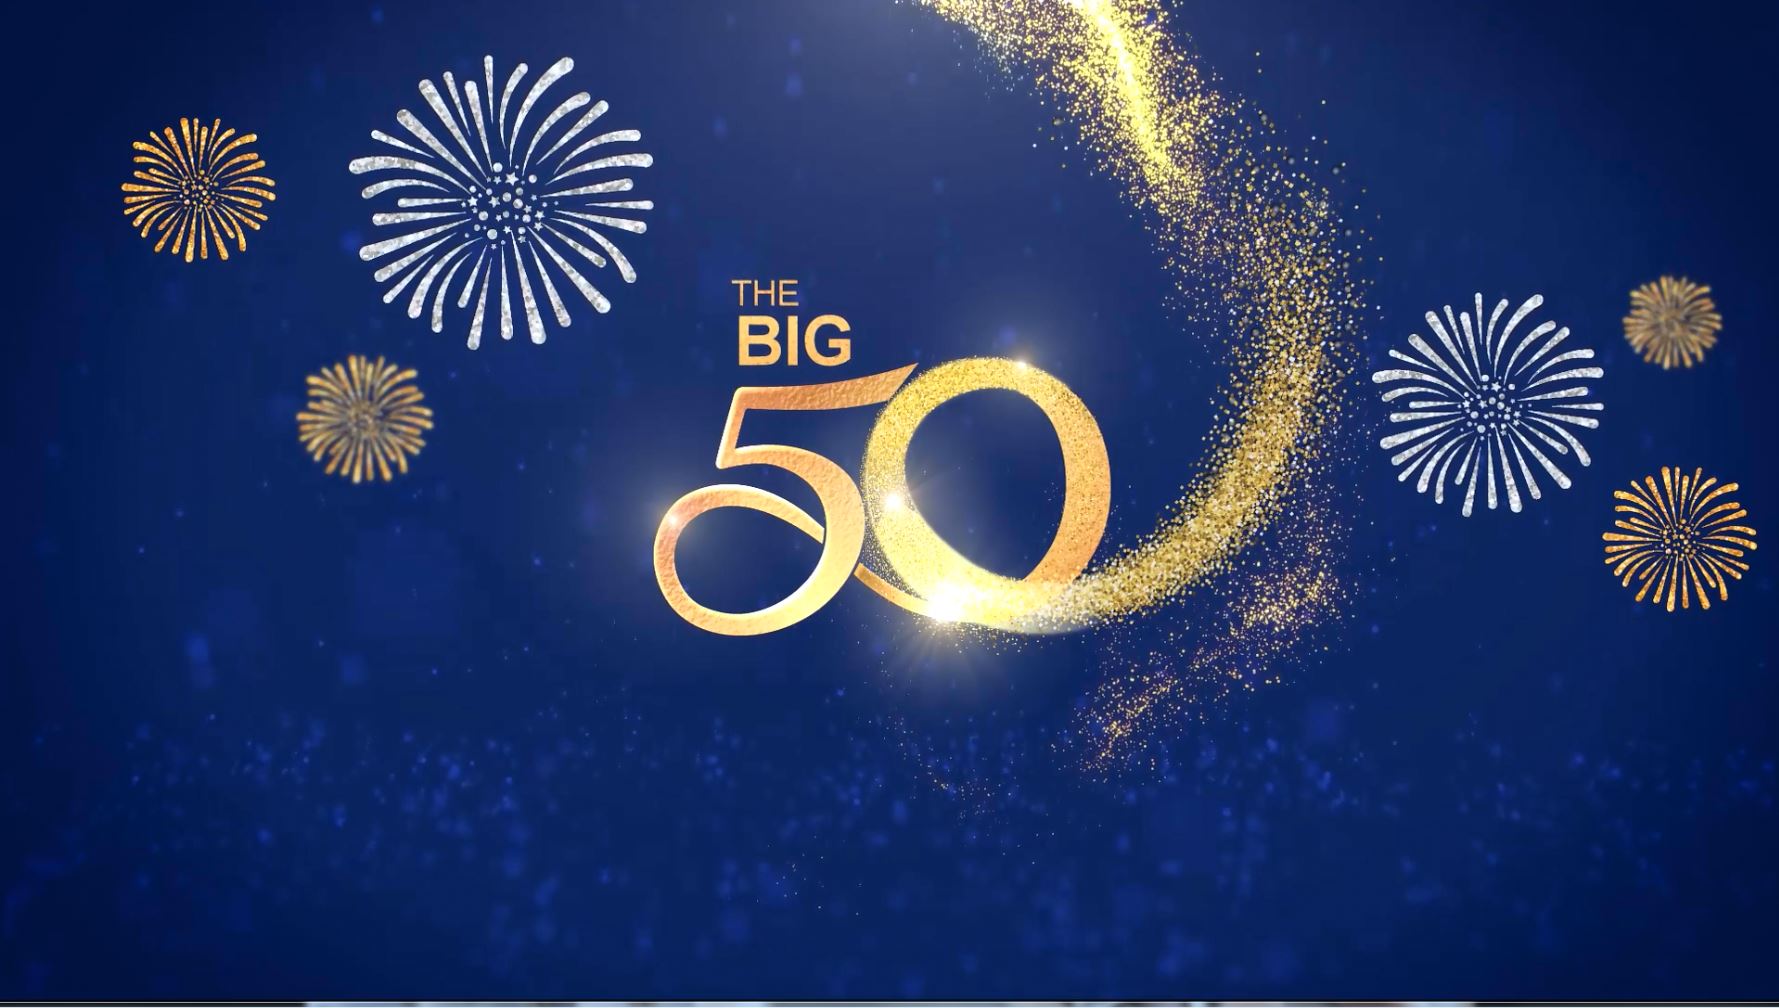 The Big 50 - Advertising | FOREFRONT International (Malaysia